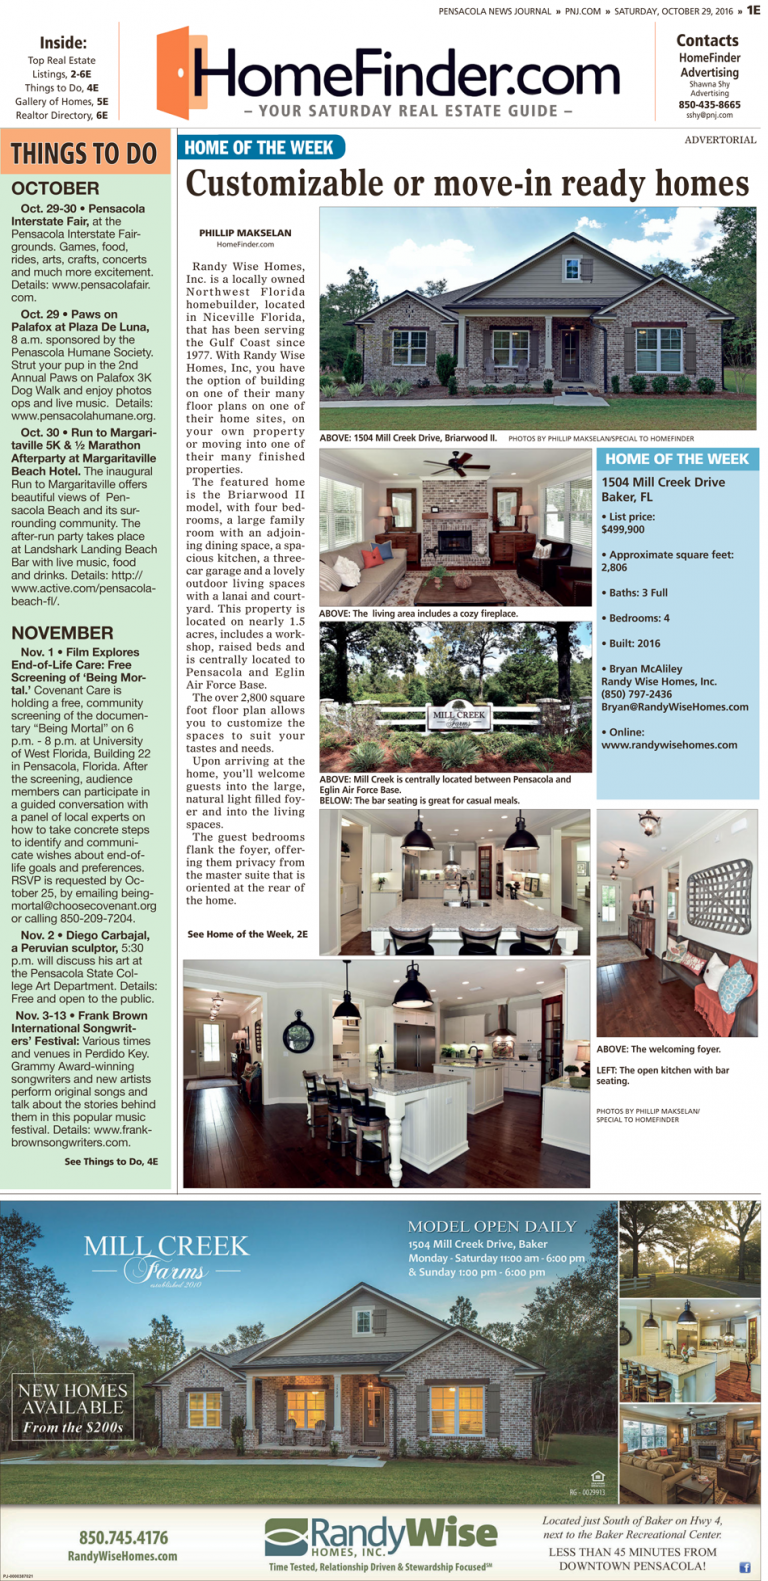 Scan of the Pensacola News Journal featuring the Mill Creek Farms model house as "Home of the Week"